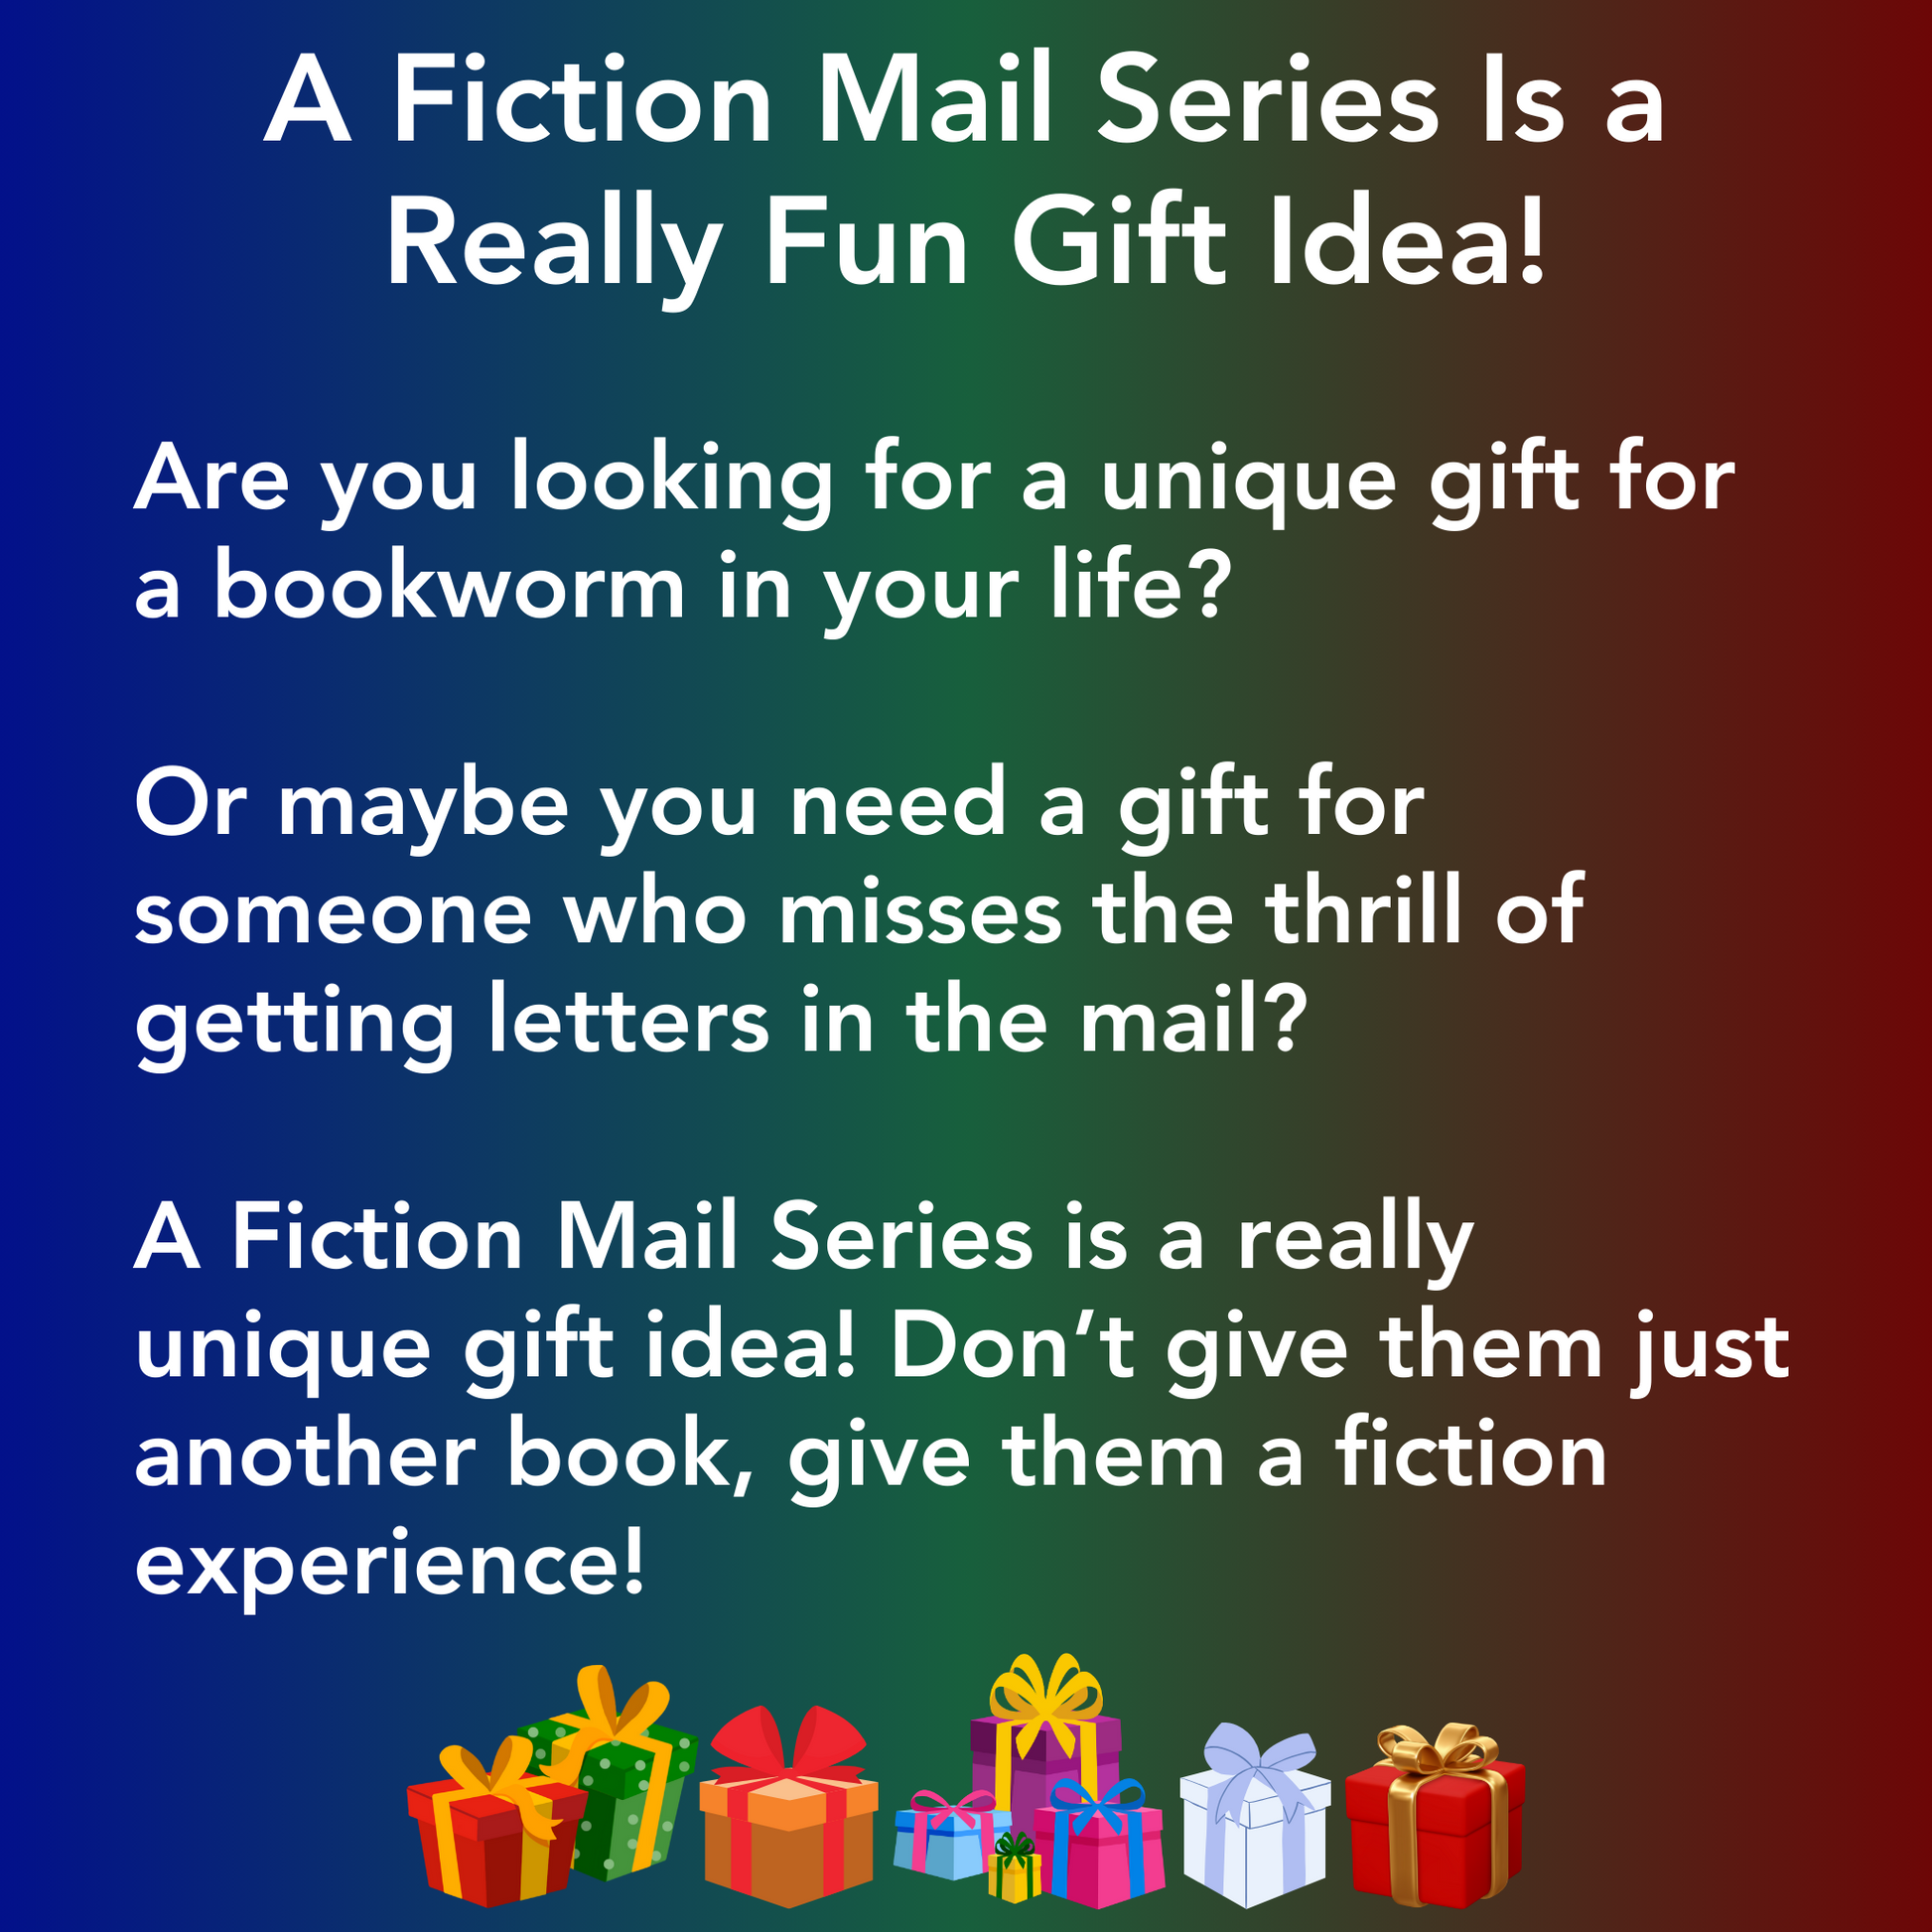 A Fiction Mail Series is a unique gift idea for the bookworm in your life.